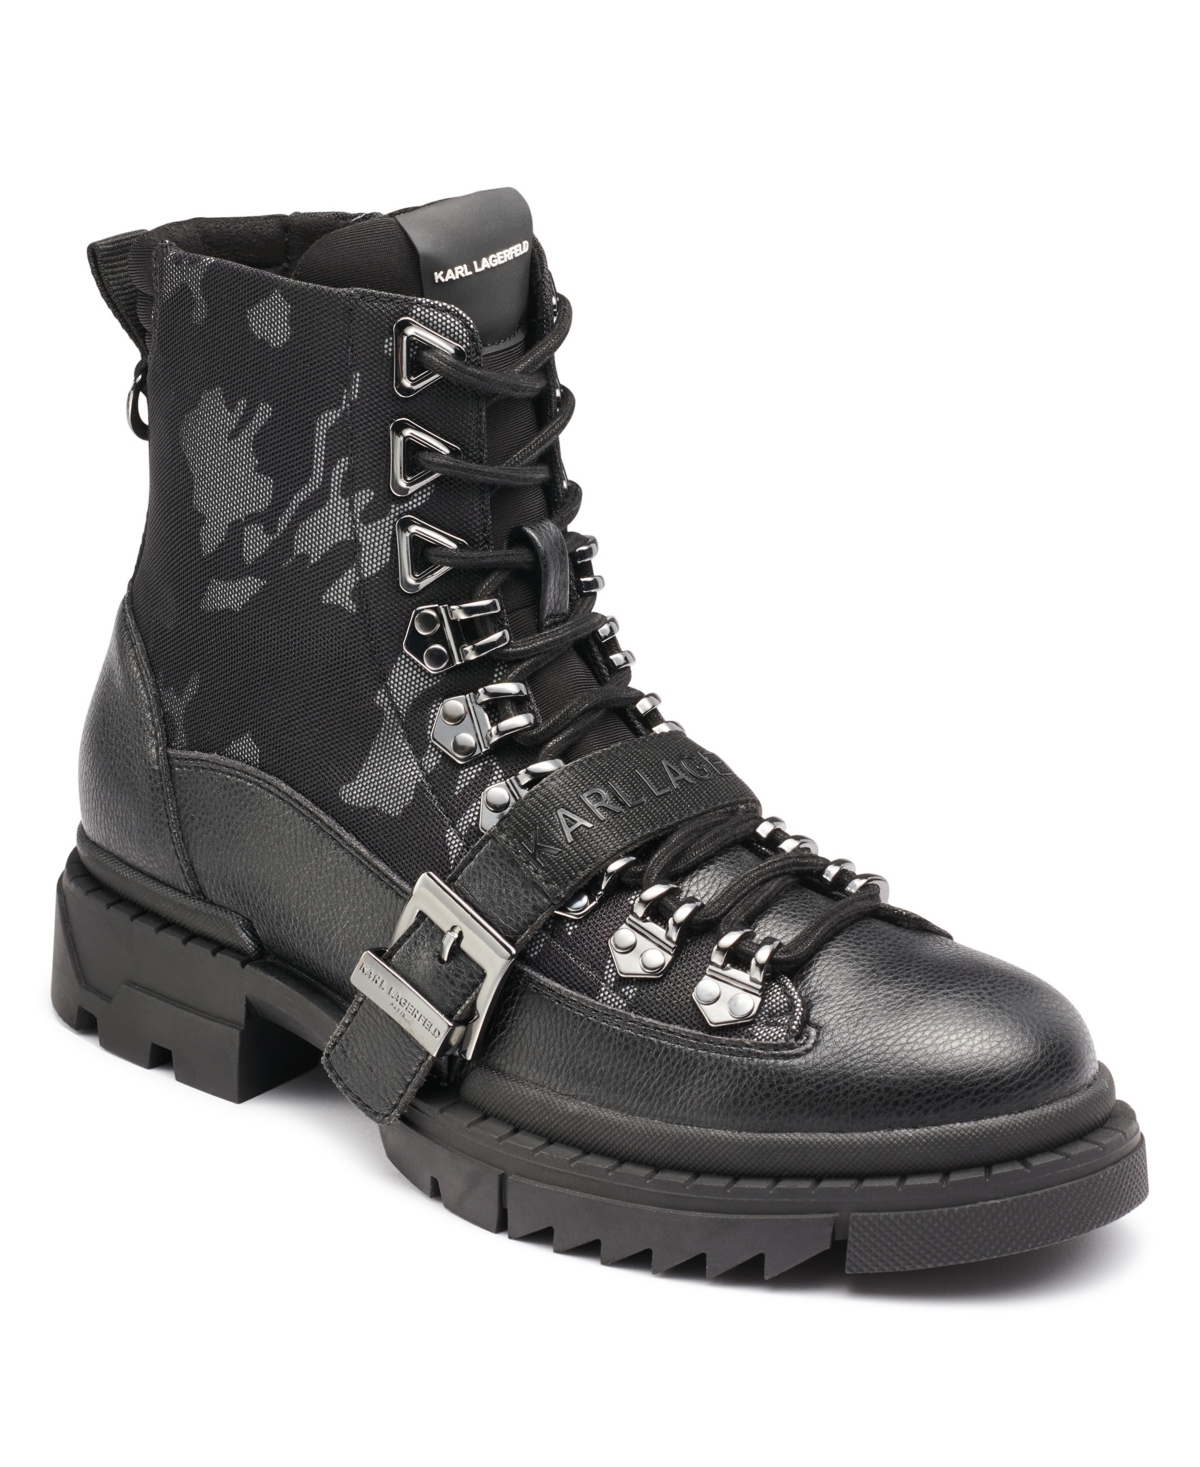 Karl Lagerfeld Men's Camo Front Logo Strap Buckle Lug Sole Boot - Black, Charcoal